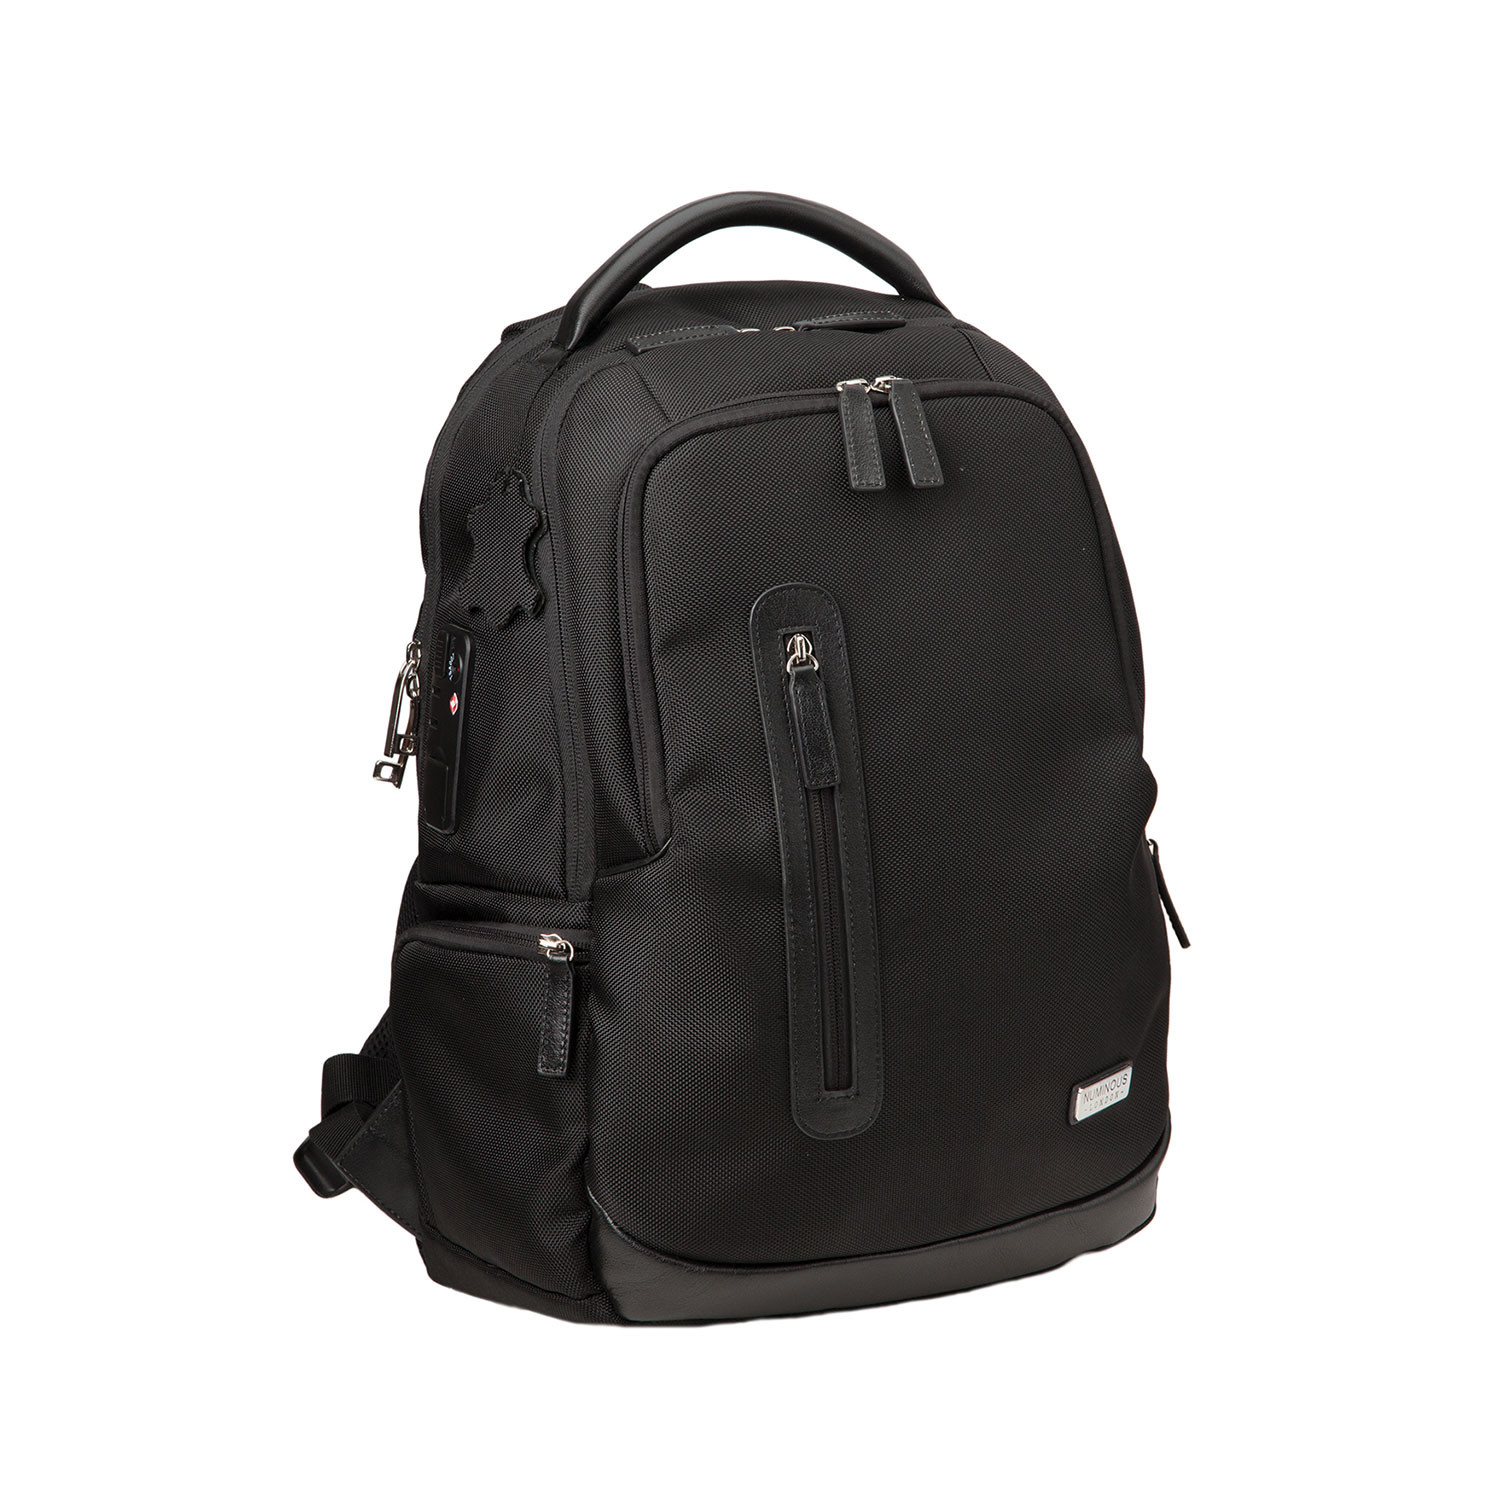 SMART Digital Backpack // 901 - Numinous London - Touch of Modern